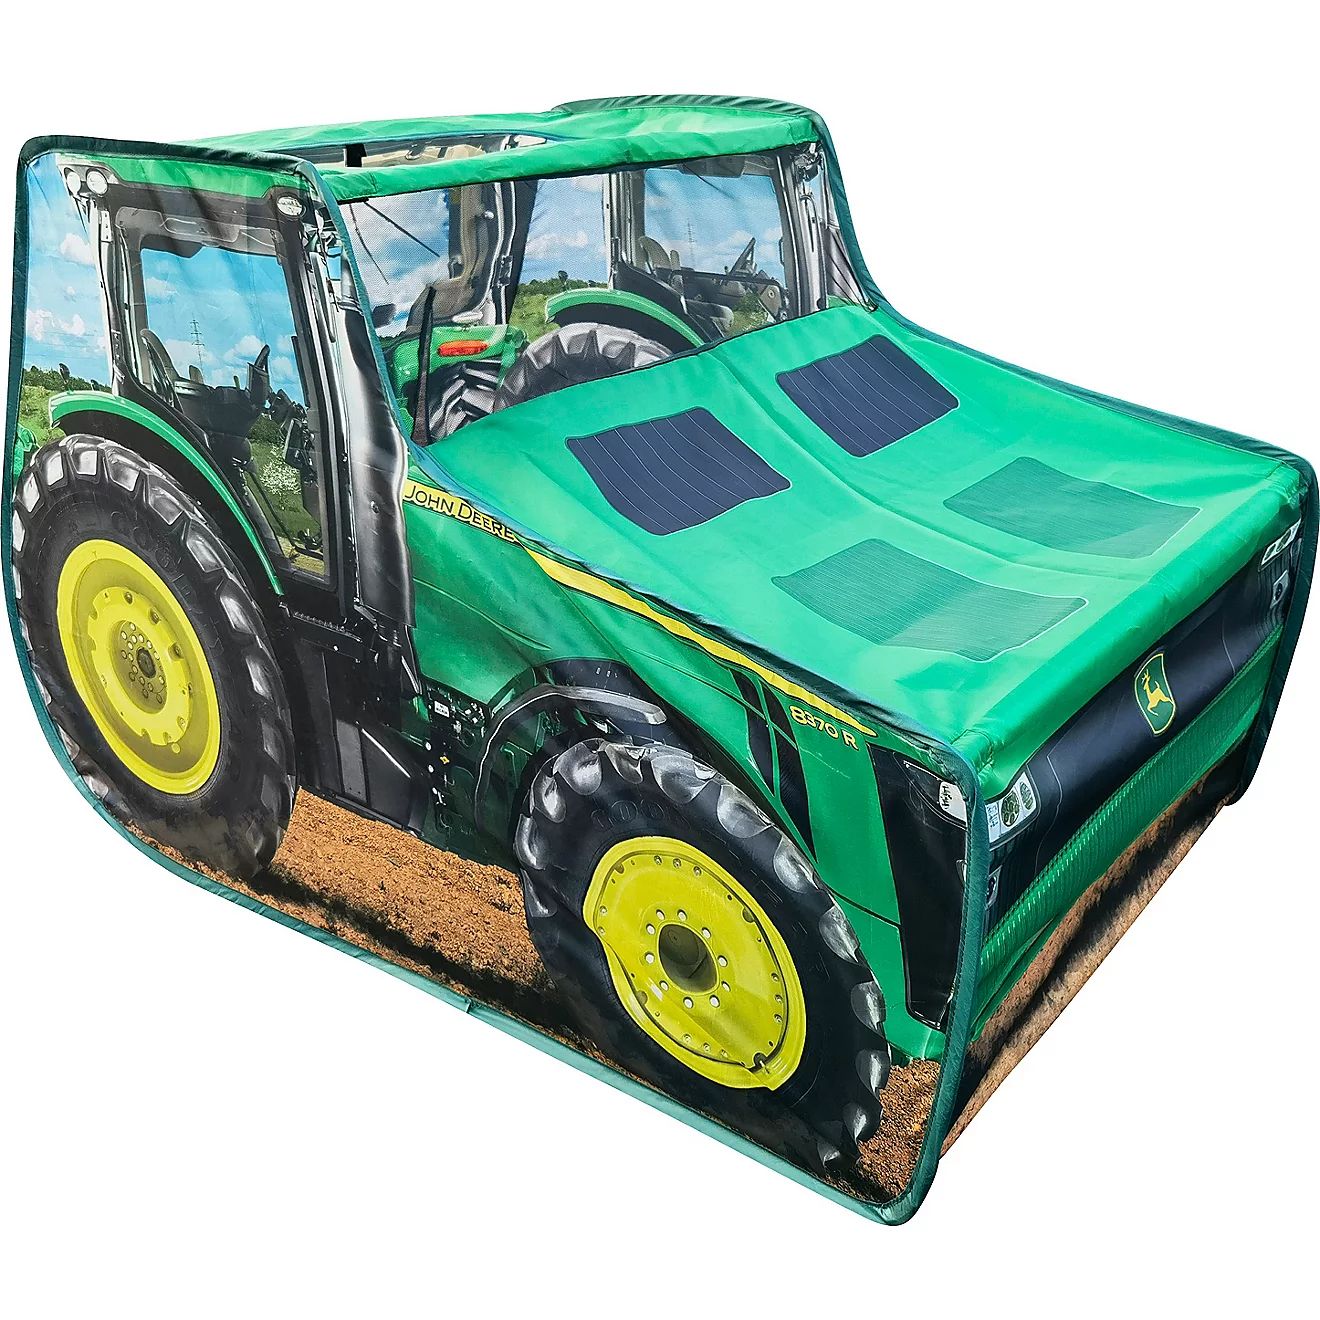 John Deere Pop-N-Play Tractor Tent | Free Shipping at Academy | Academy Sports + Outdoors